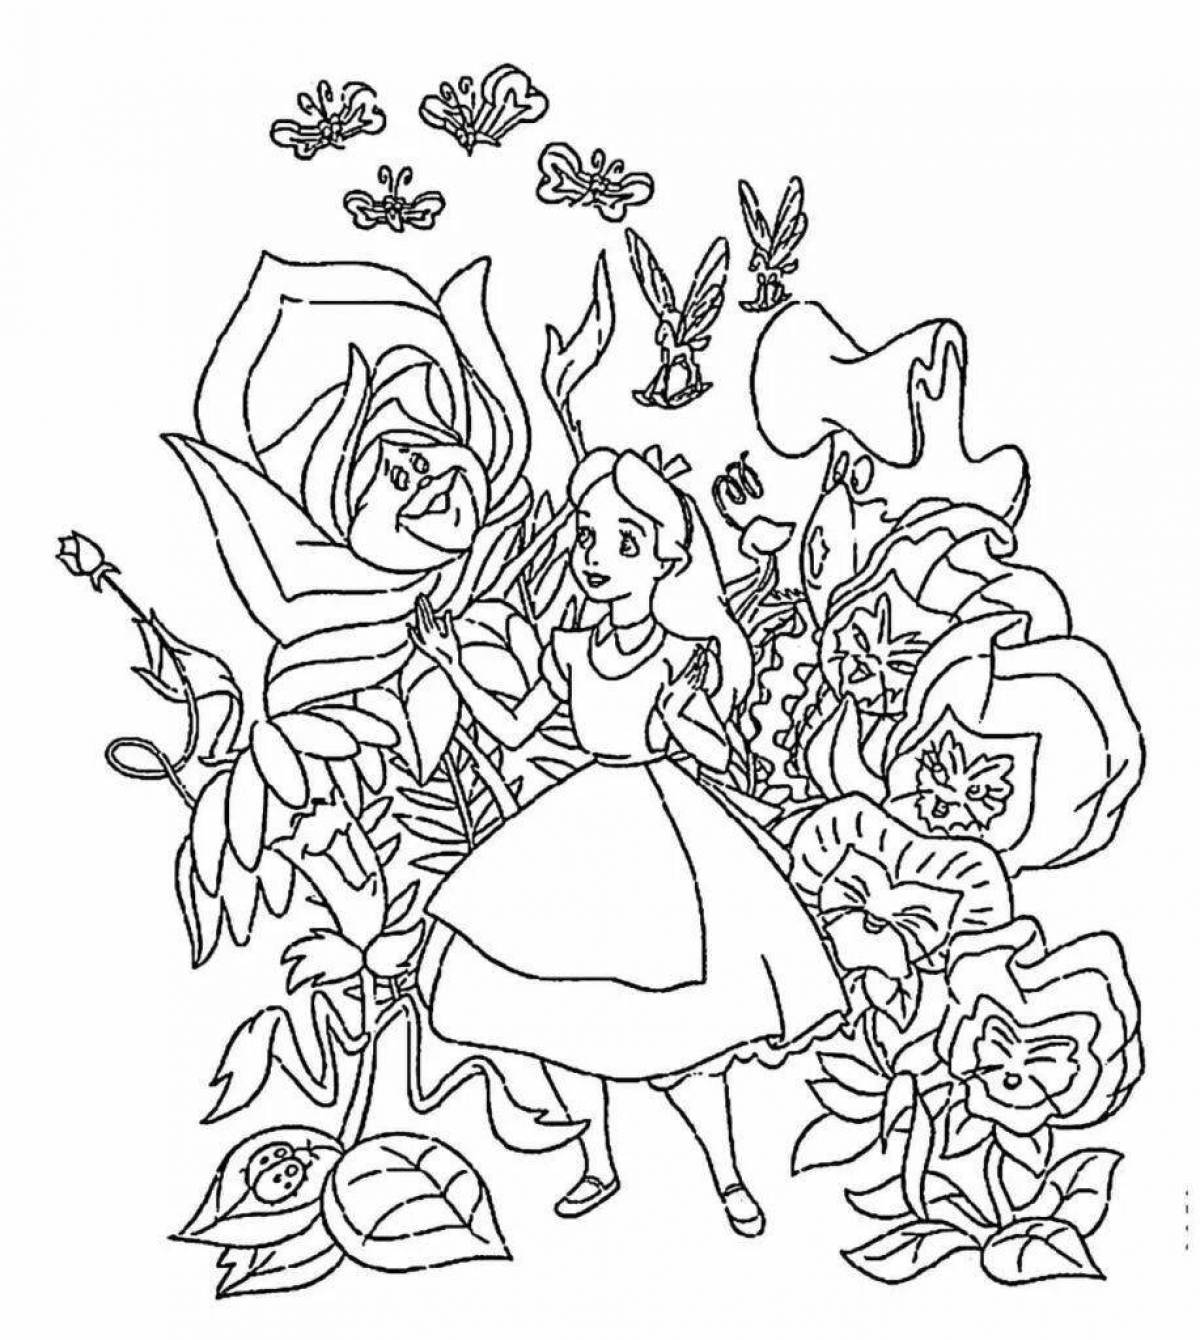 Radiant fairy tale coloring book for girls